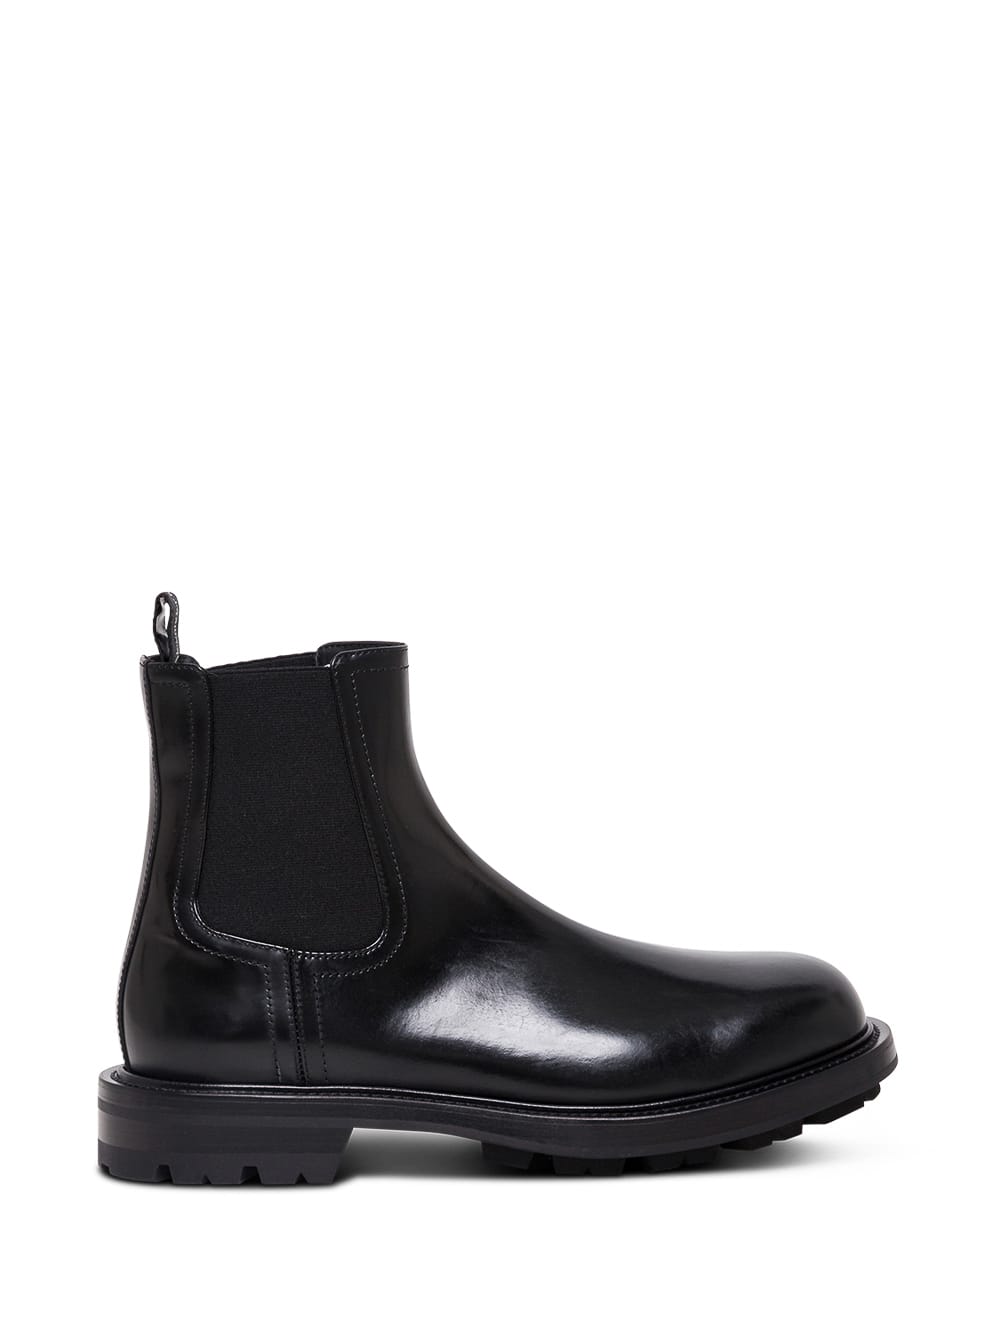 Alexander Mcqueen Mans Black Leather Ankle Boots